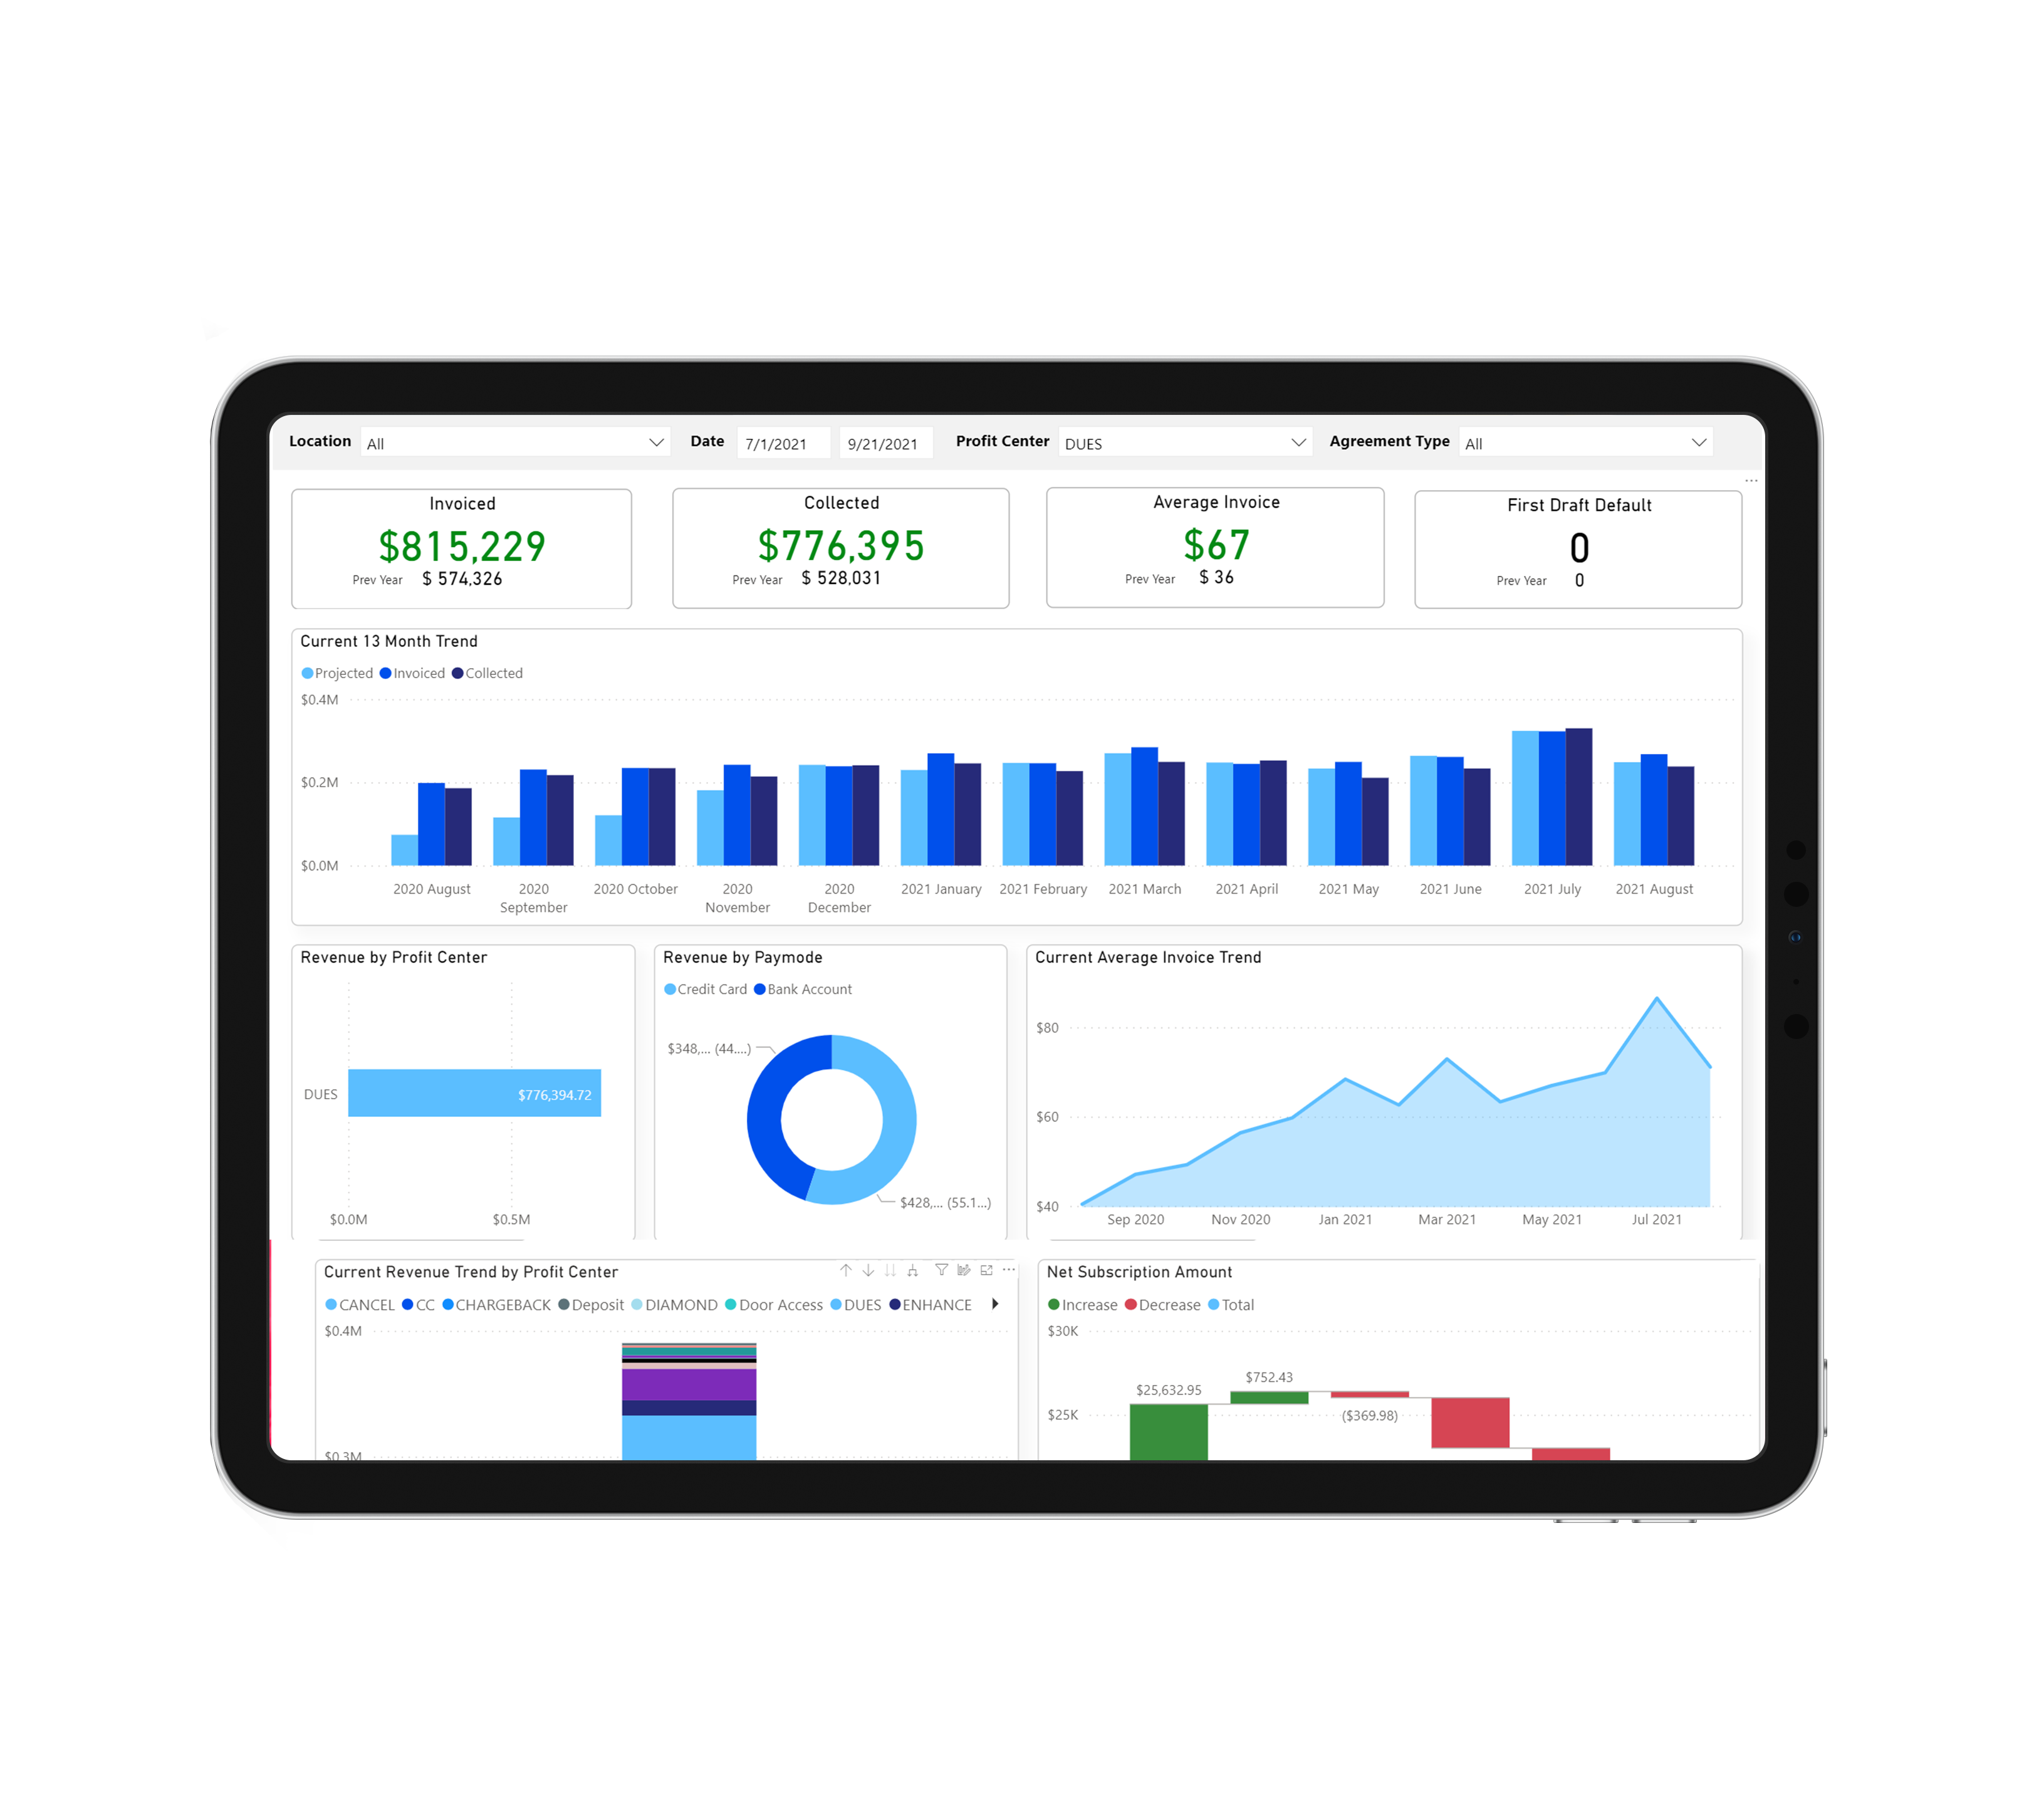 Ignite optimizes your membership, operations, billing, & reporting. Consolidating smart technologies into an all-in-one gym software simplifies the day-to-day tasks, increases efficiency, reduces costs, & helps your team provide a better member experience